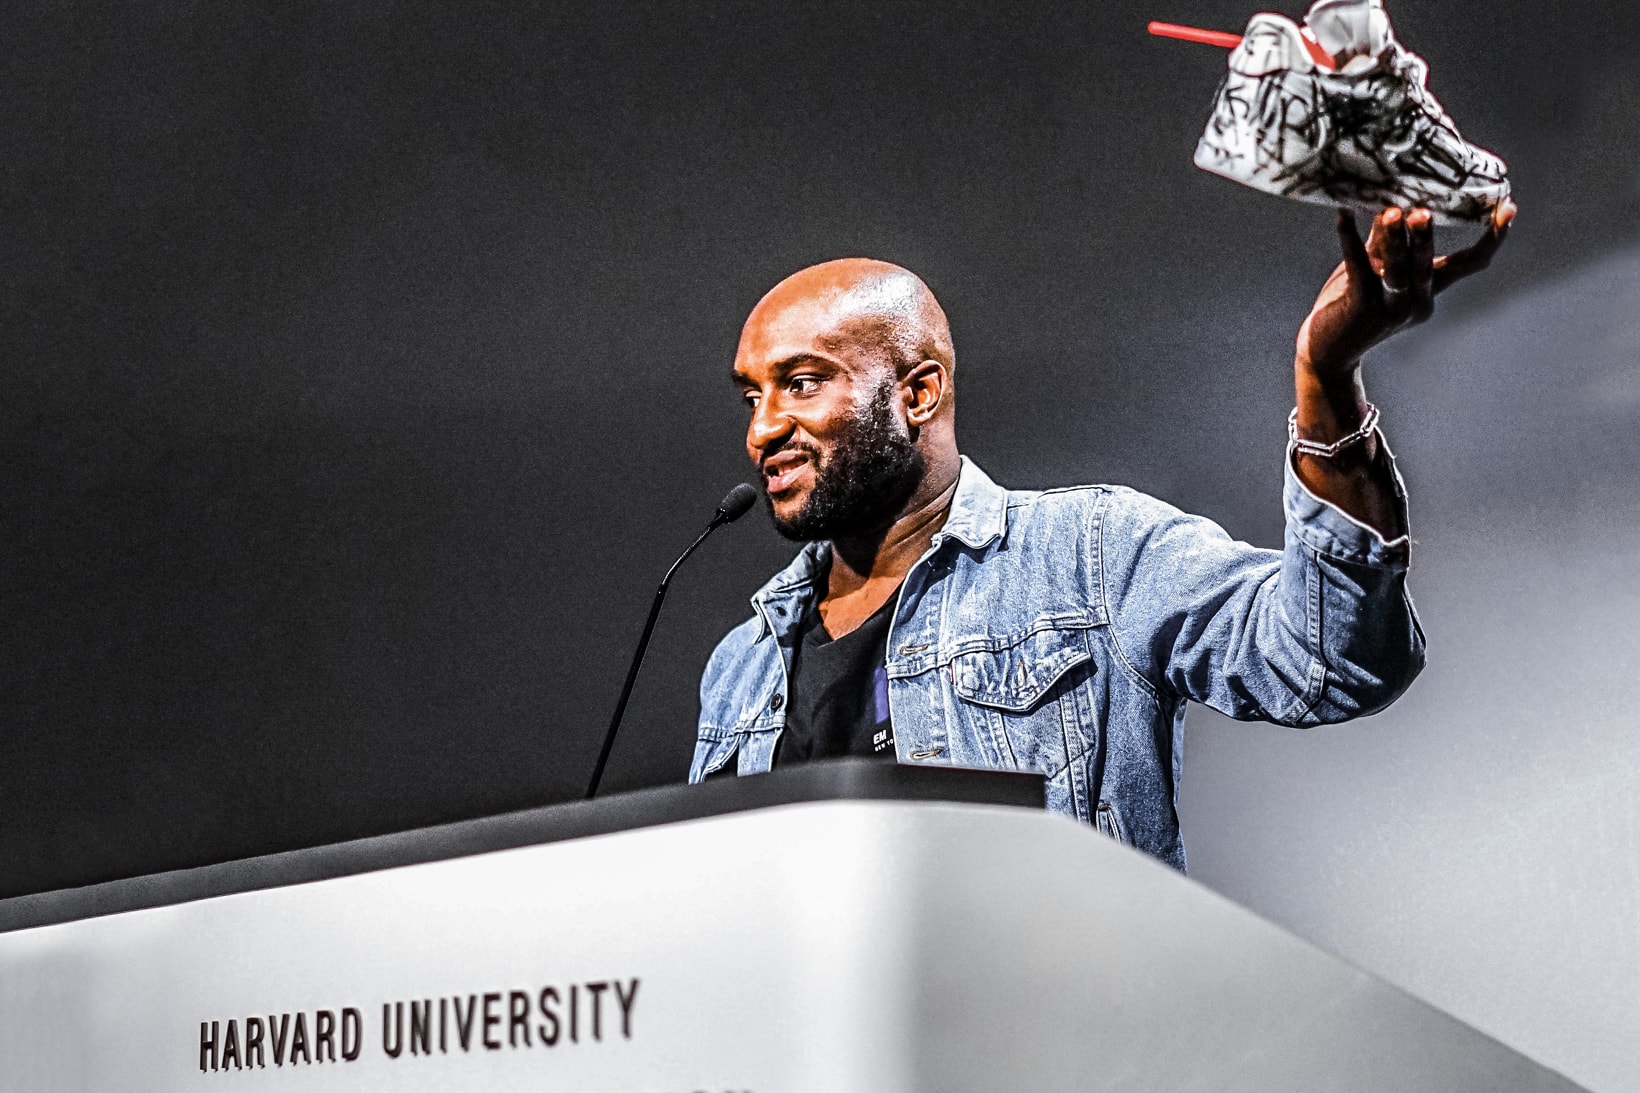 The Incidents Virgil Abloh: “Insert Complicated Title Here” – WK®